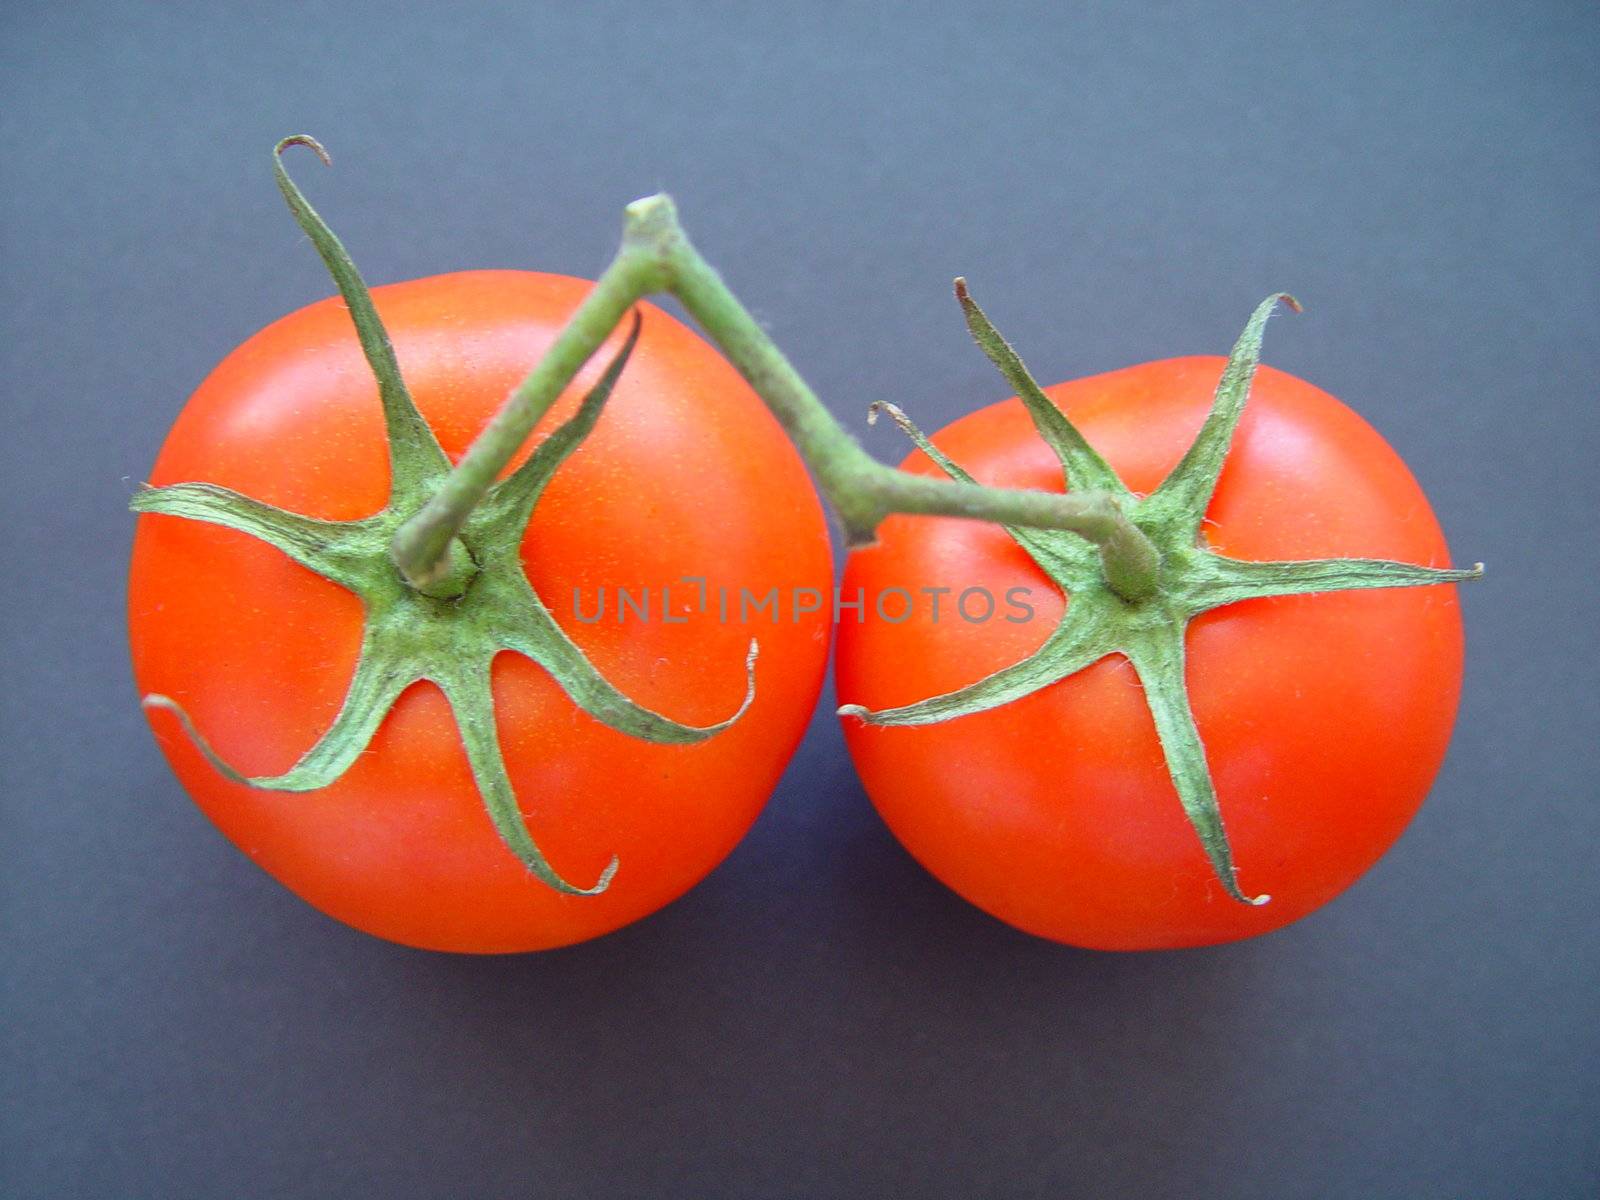 Two bright red tomatoes on black background.